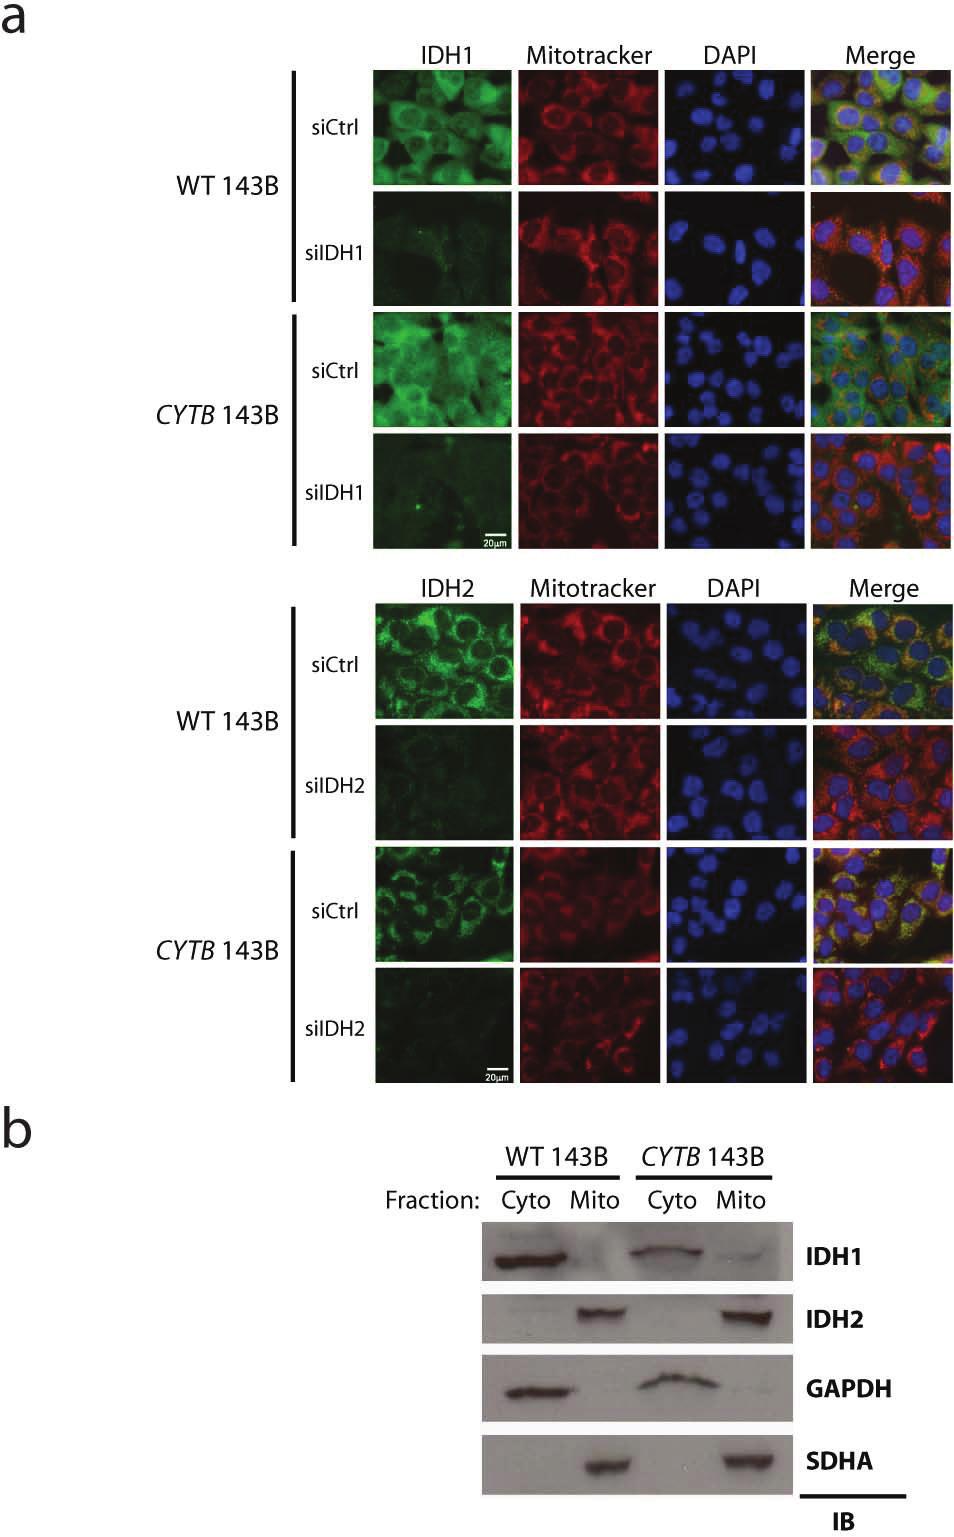 RESEARCH Supplementary Fig. 6. Subcellular localization of IDH1 and IDH2. a, Immunofluorescence of WT 143B and CYTB 143B cells using antibodies against IDH1 (top panels) or IDH2 (bottom panels).